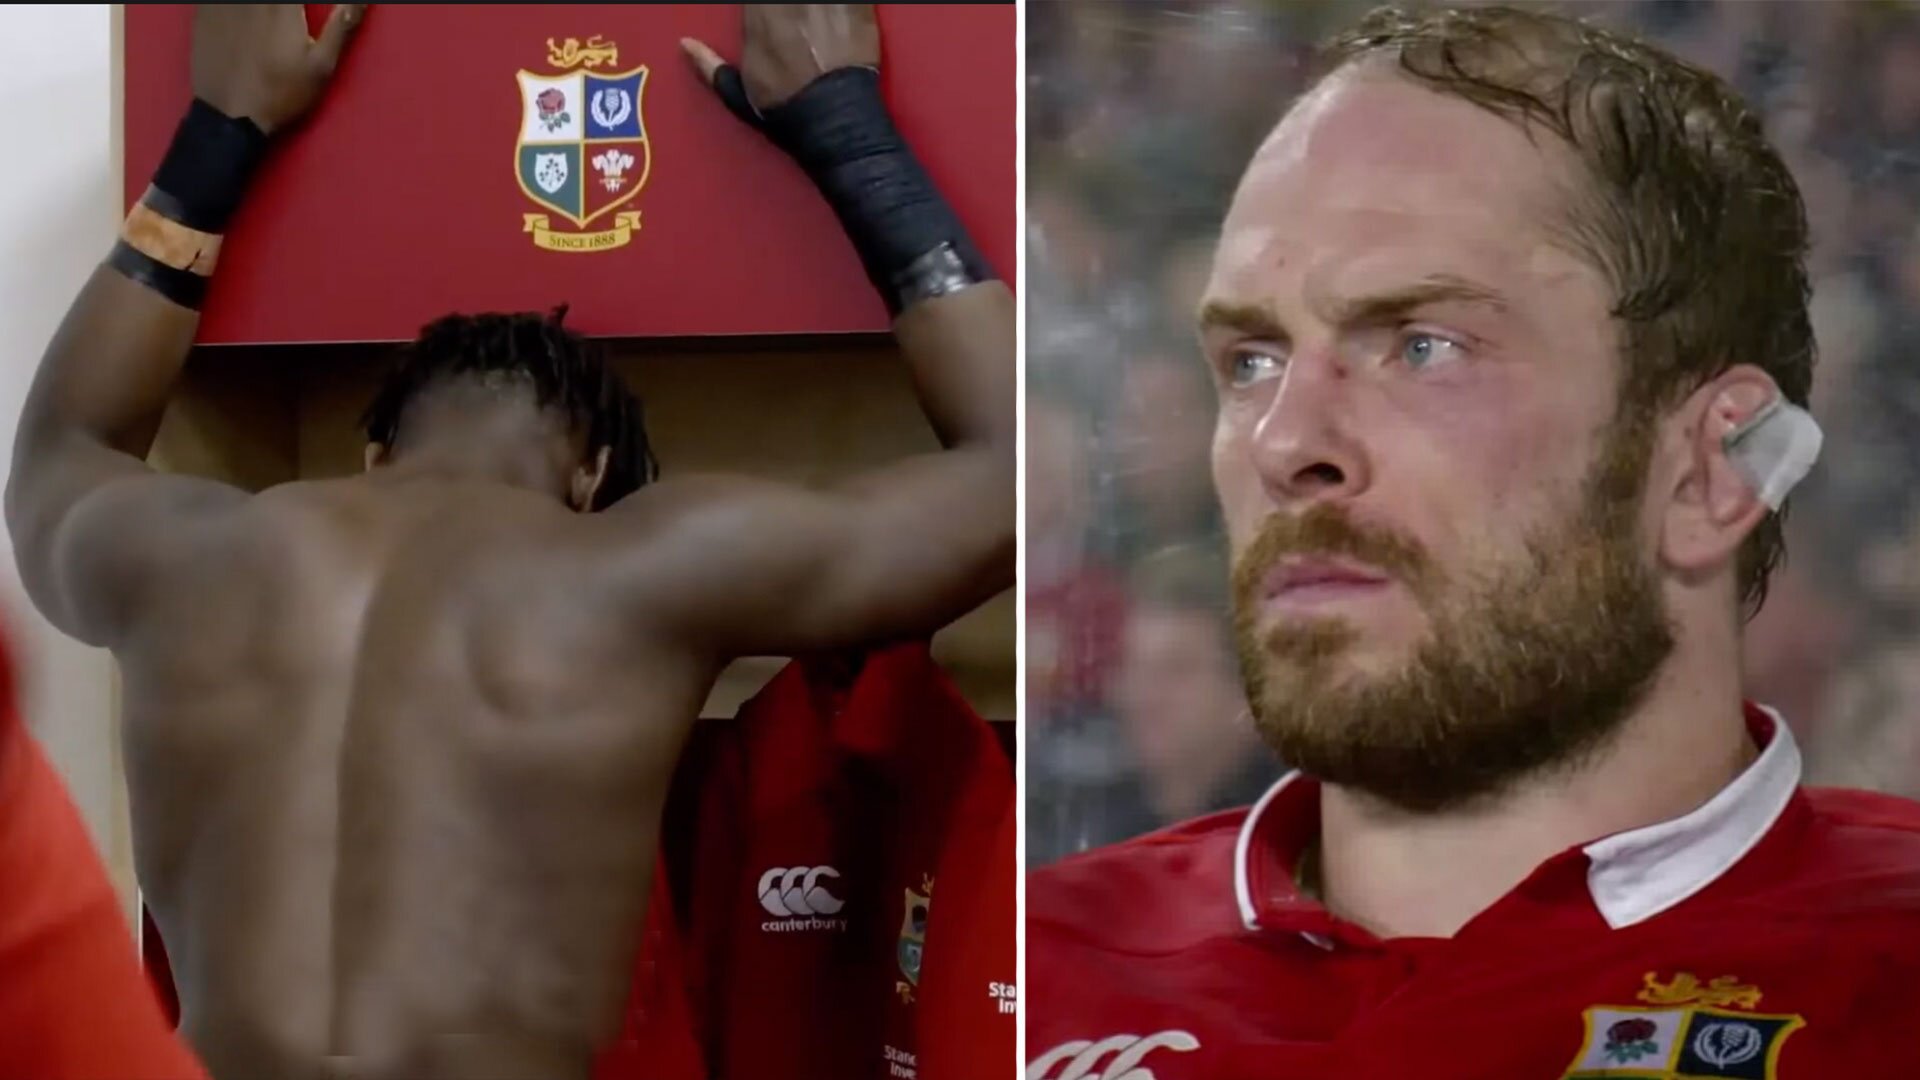 Vodafone announce they are official shirt sponsors of Lions in spine-tingling new video